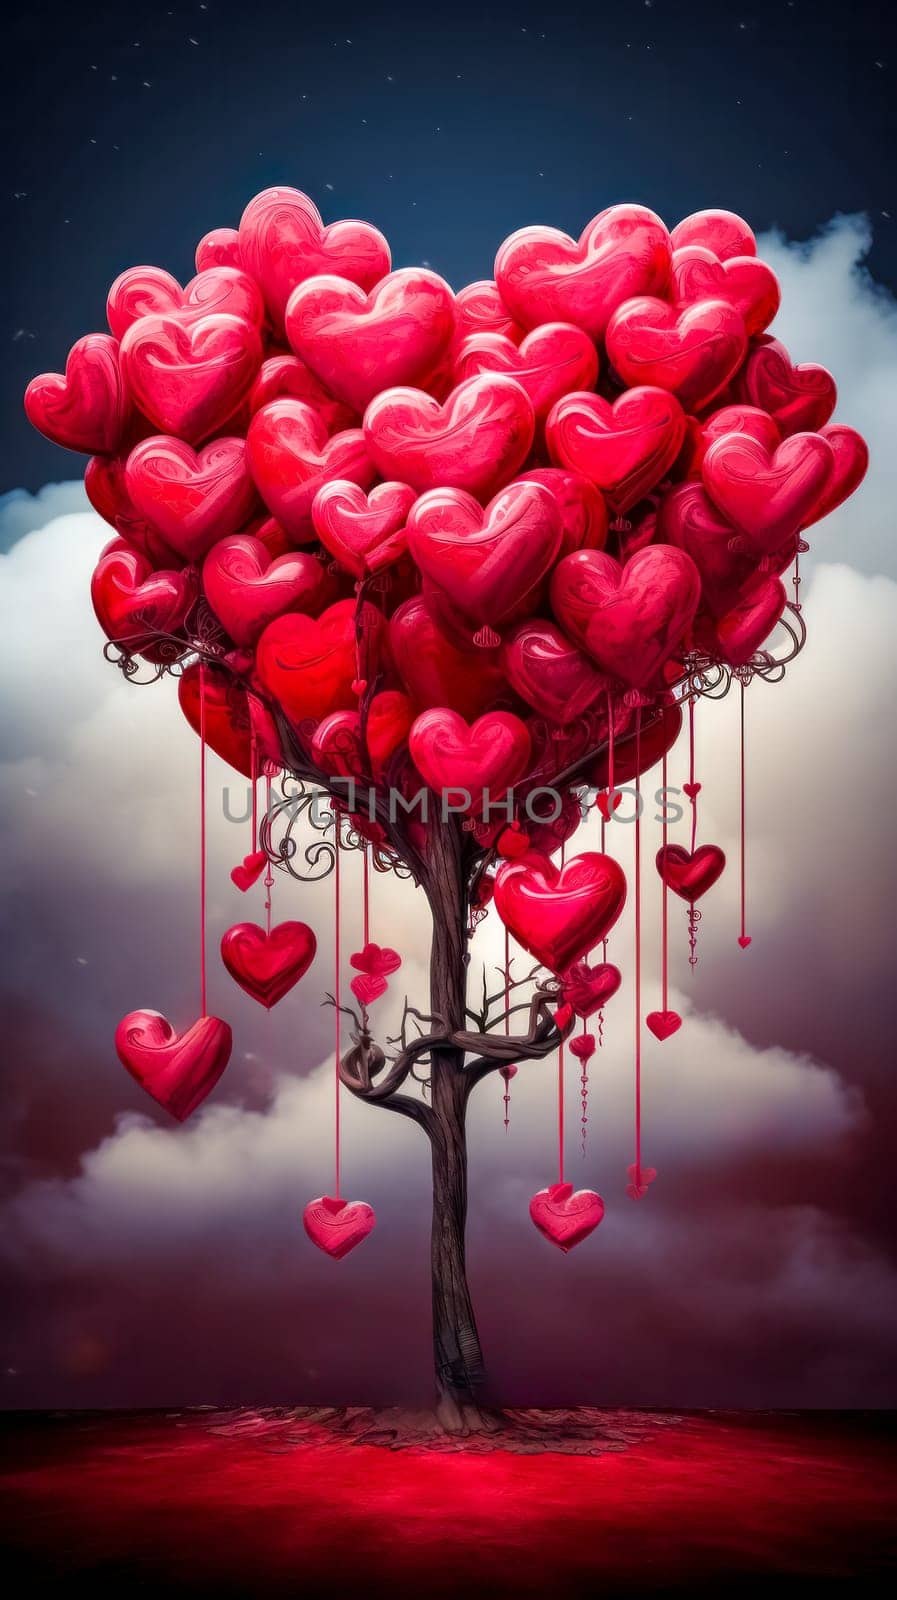 valentine day, whimsical tree with branches forming a canopy of glossy, oversized red heart-shaped balloons against a dramatic sky, symbolizing love and romance in a surreal, artistic setting vertical